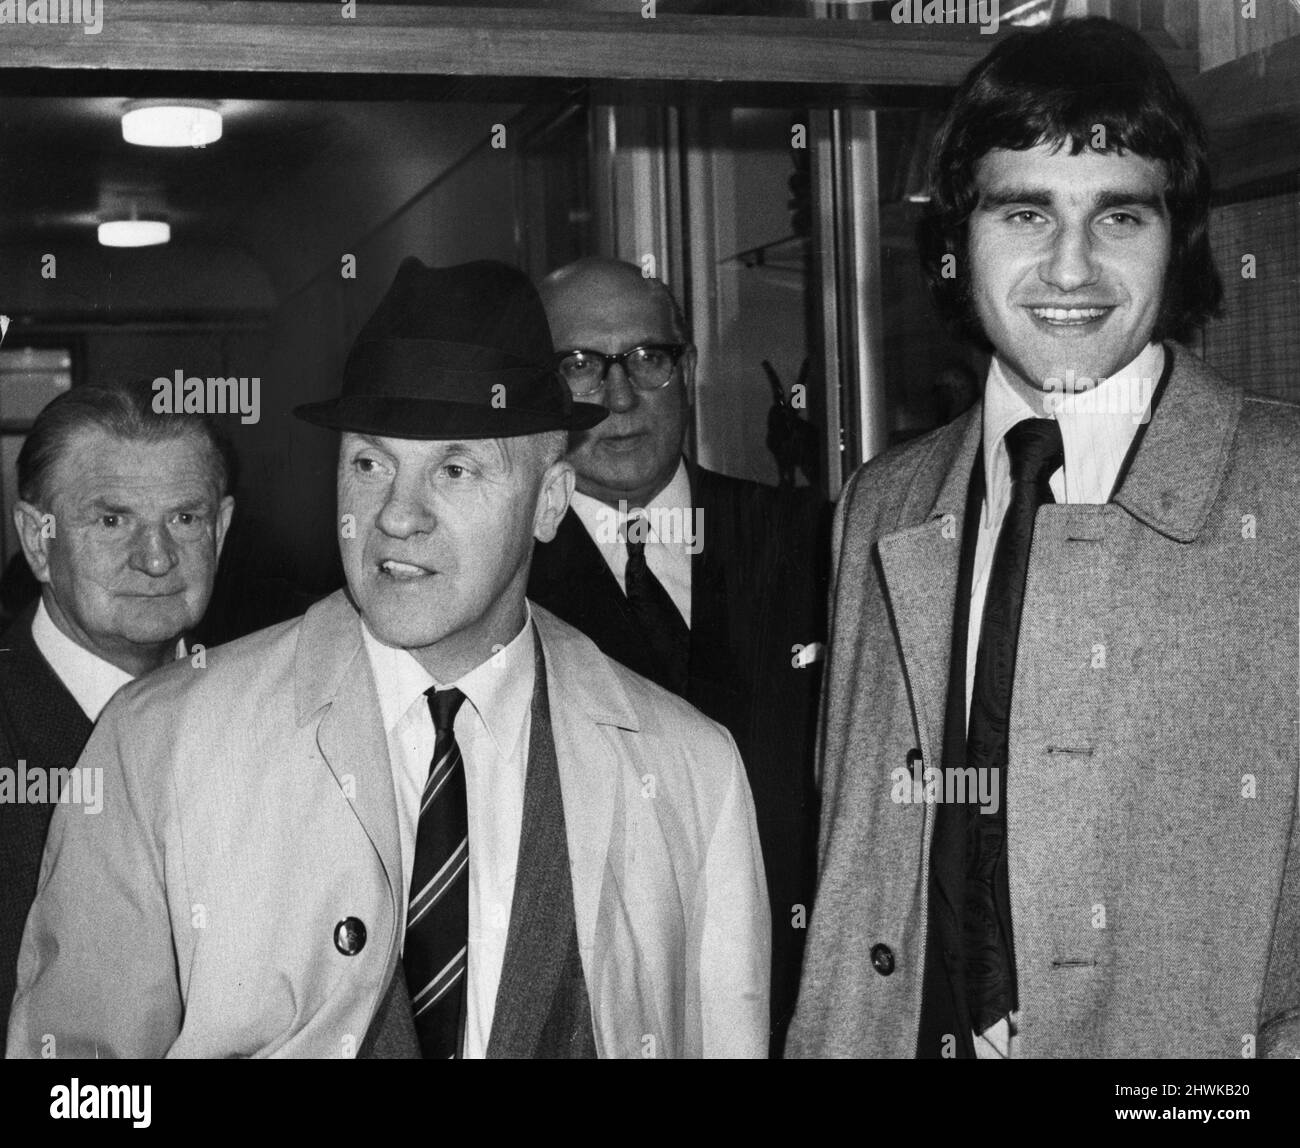 Larry Lloyd Liverpool centre half with Liverpool manager Bill Shankly, pictured leaving FA disciplinary hearing at Lancaster Gate in London November 1972. Stock Photo